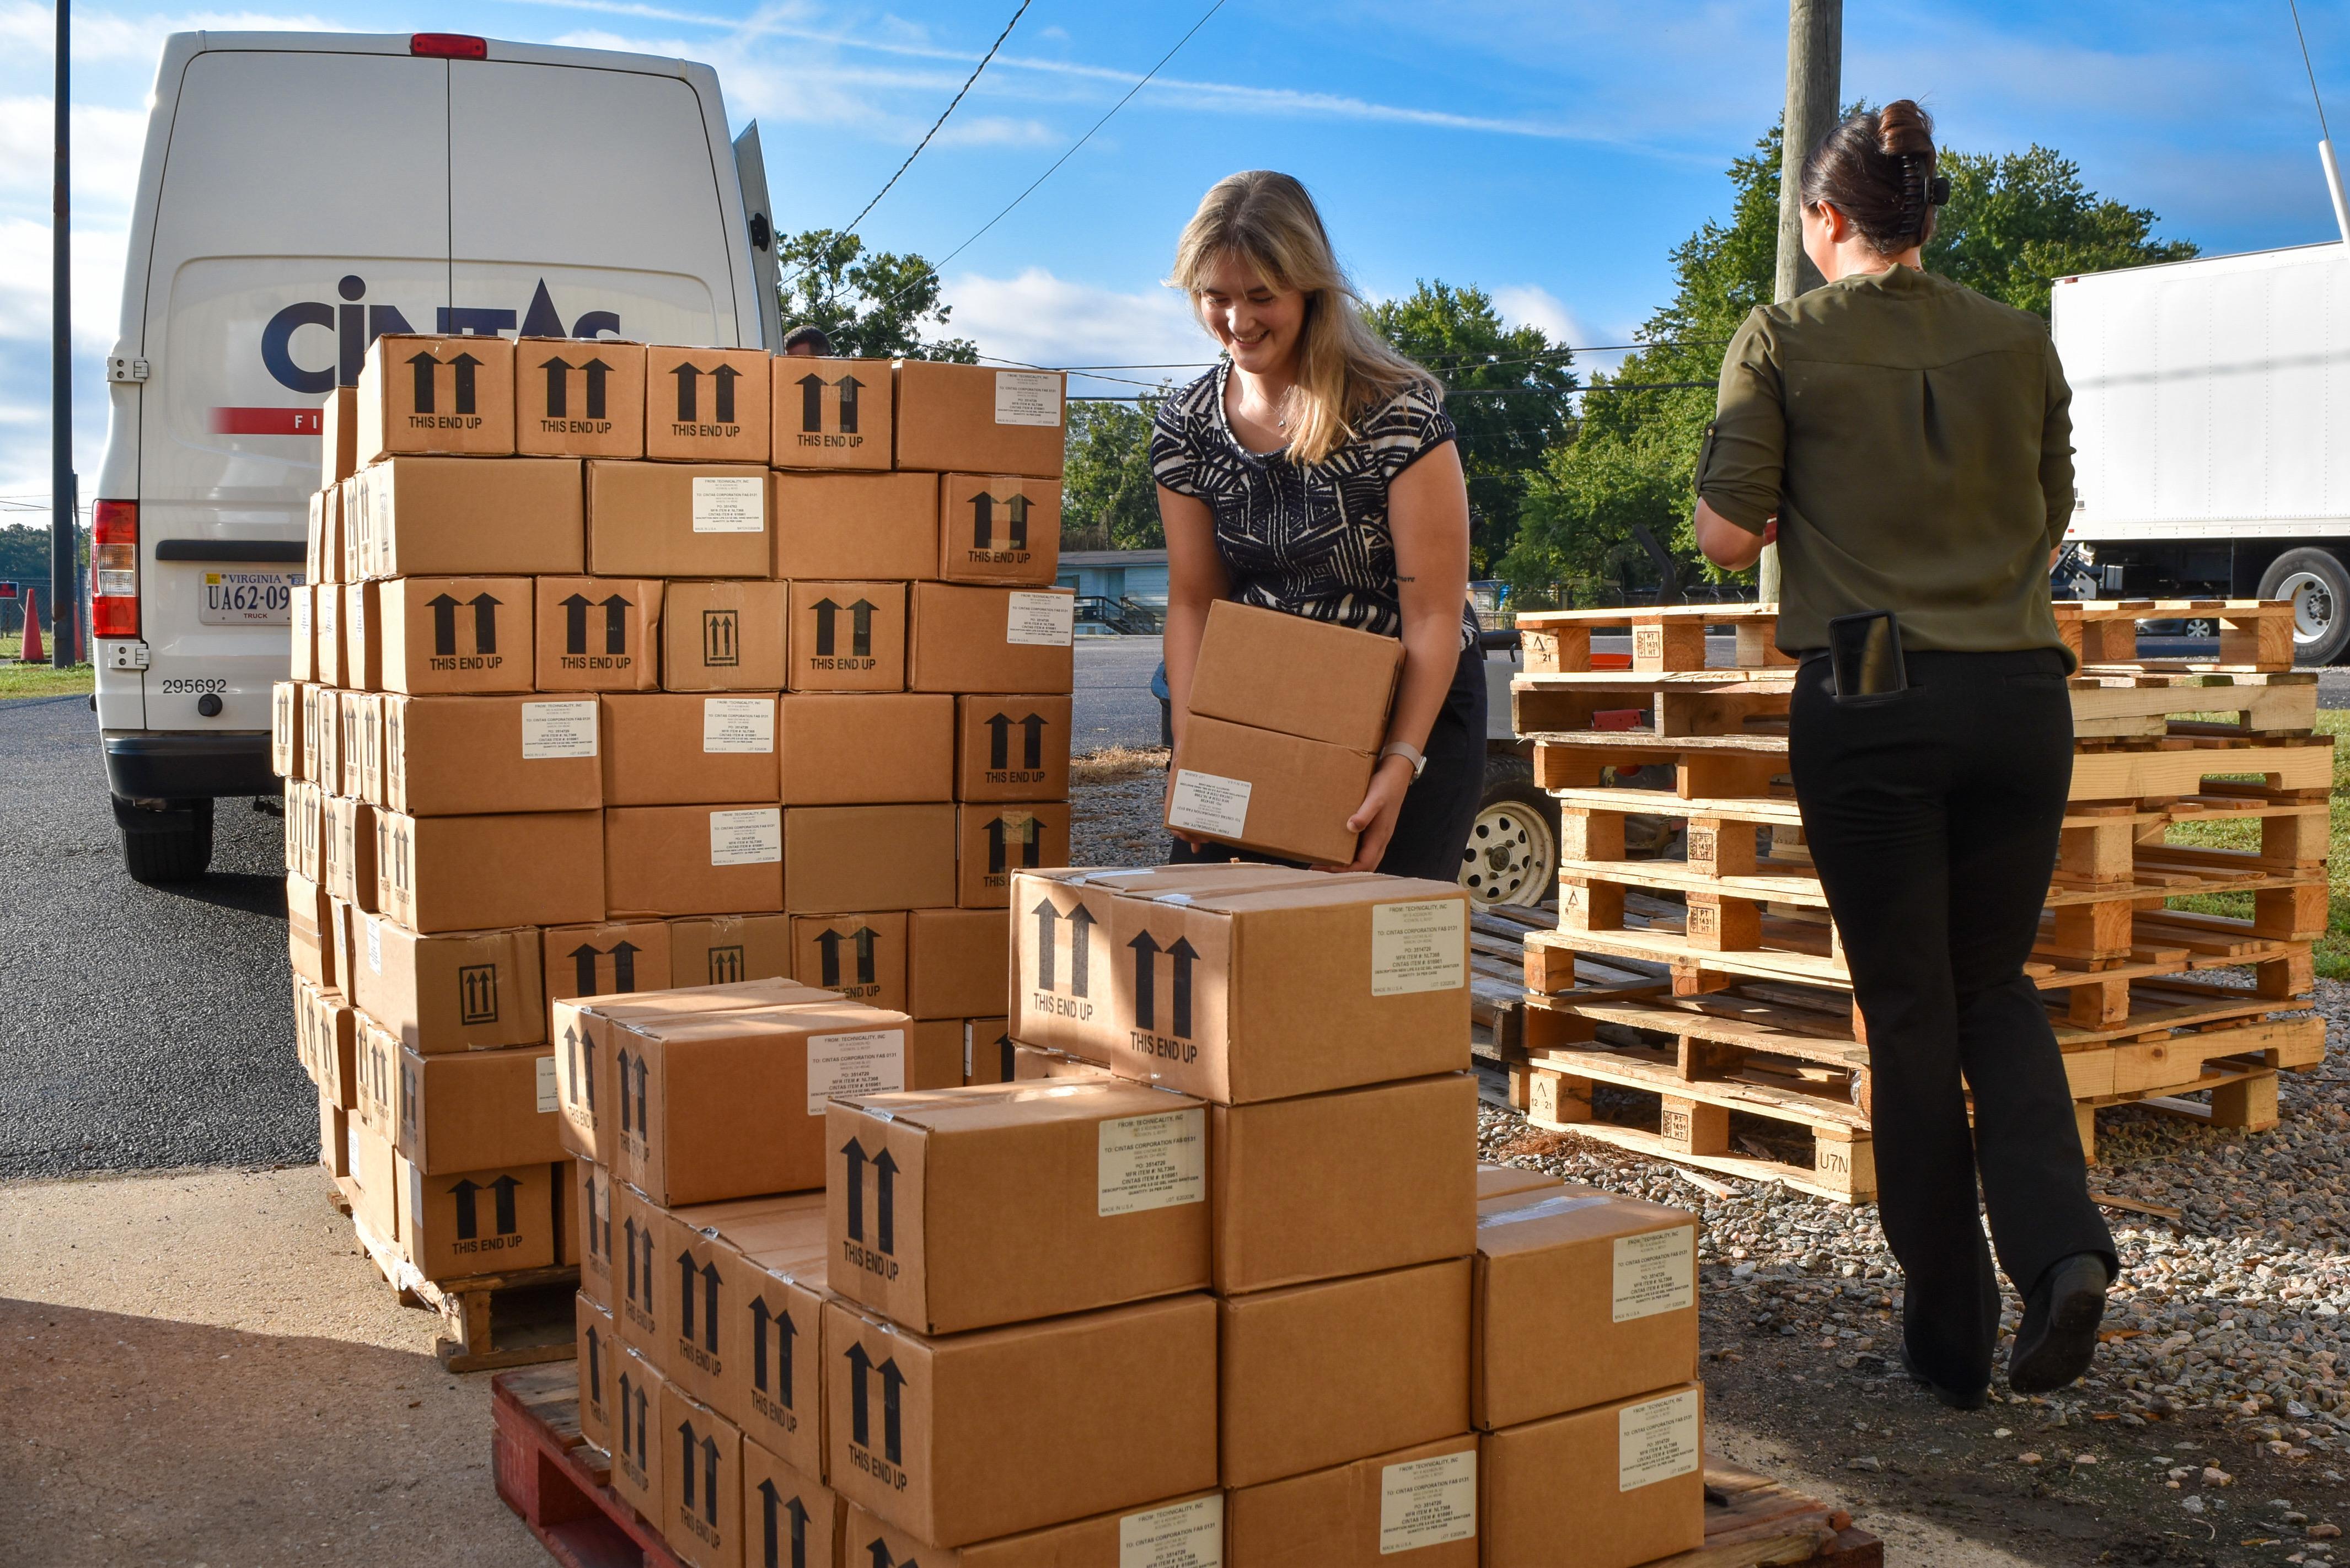 Cintas staff loads boxes of hand sanitizer onto pallets as they deliver the donation to the division's central ware